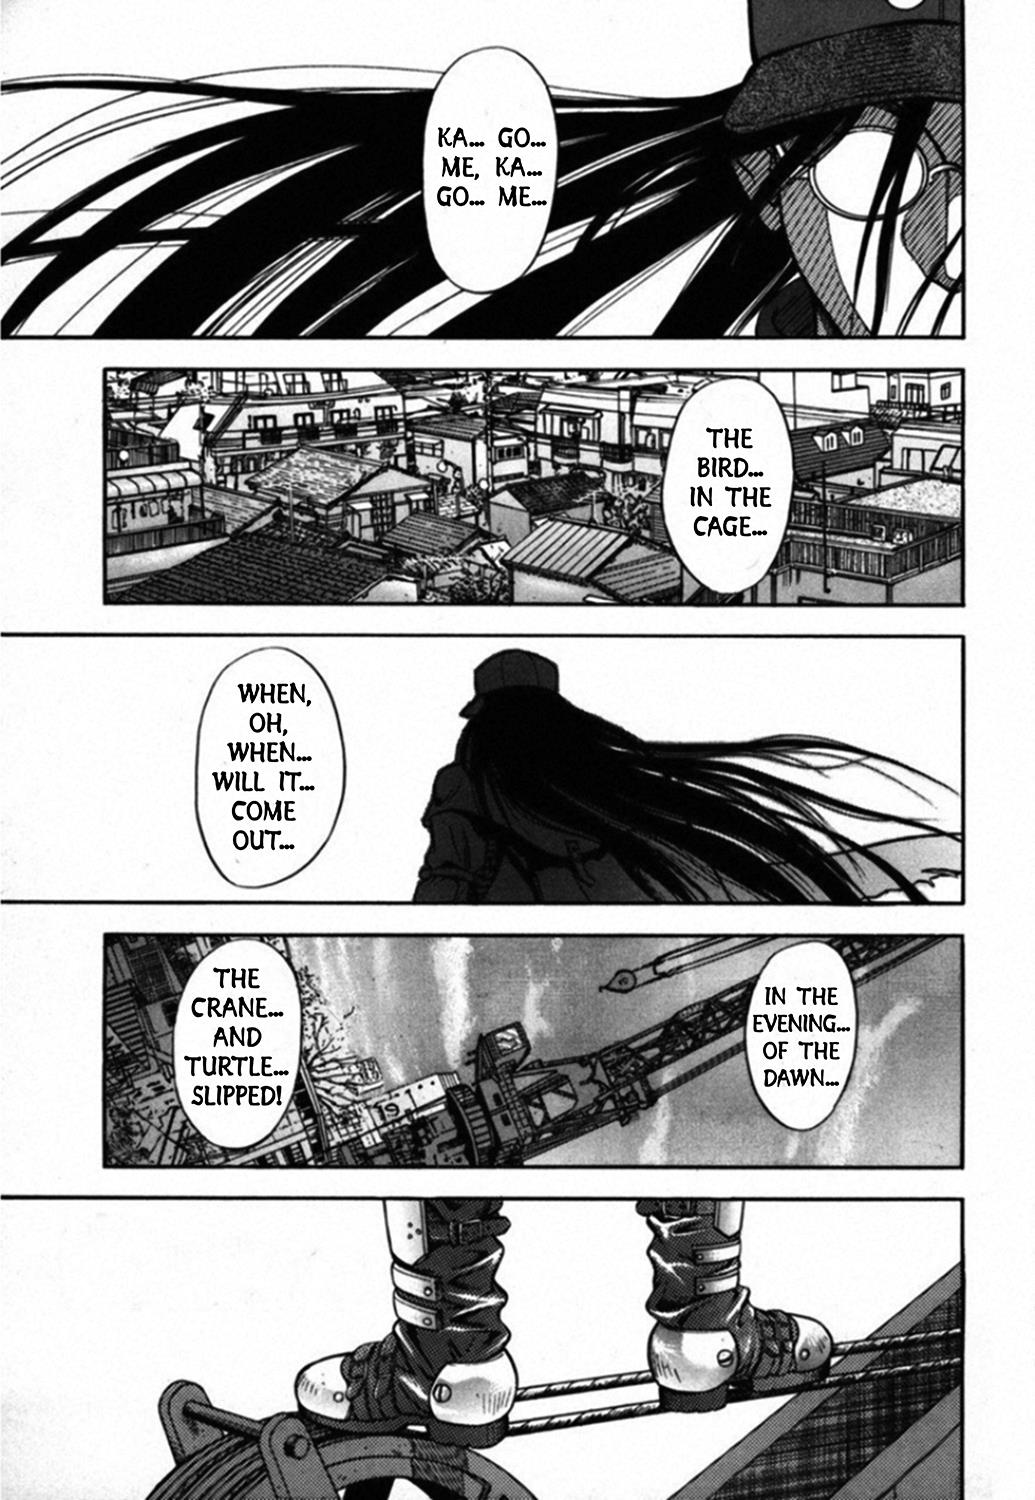 Kakeru Vol.3 Chapter 36: A Grudge Forged In Hellfire - 1 - Picture 1